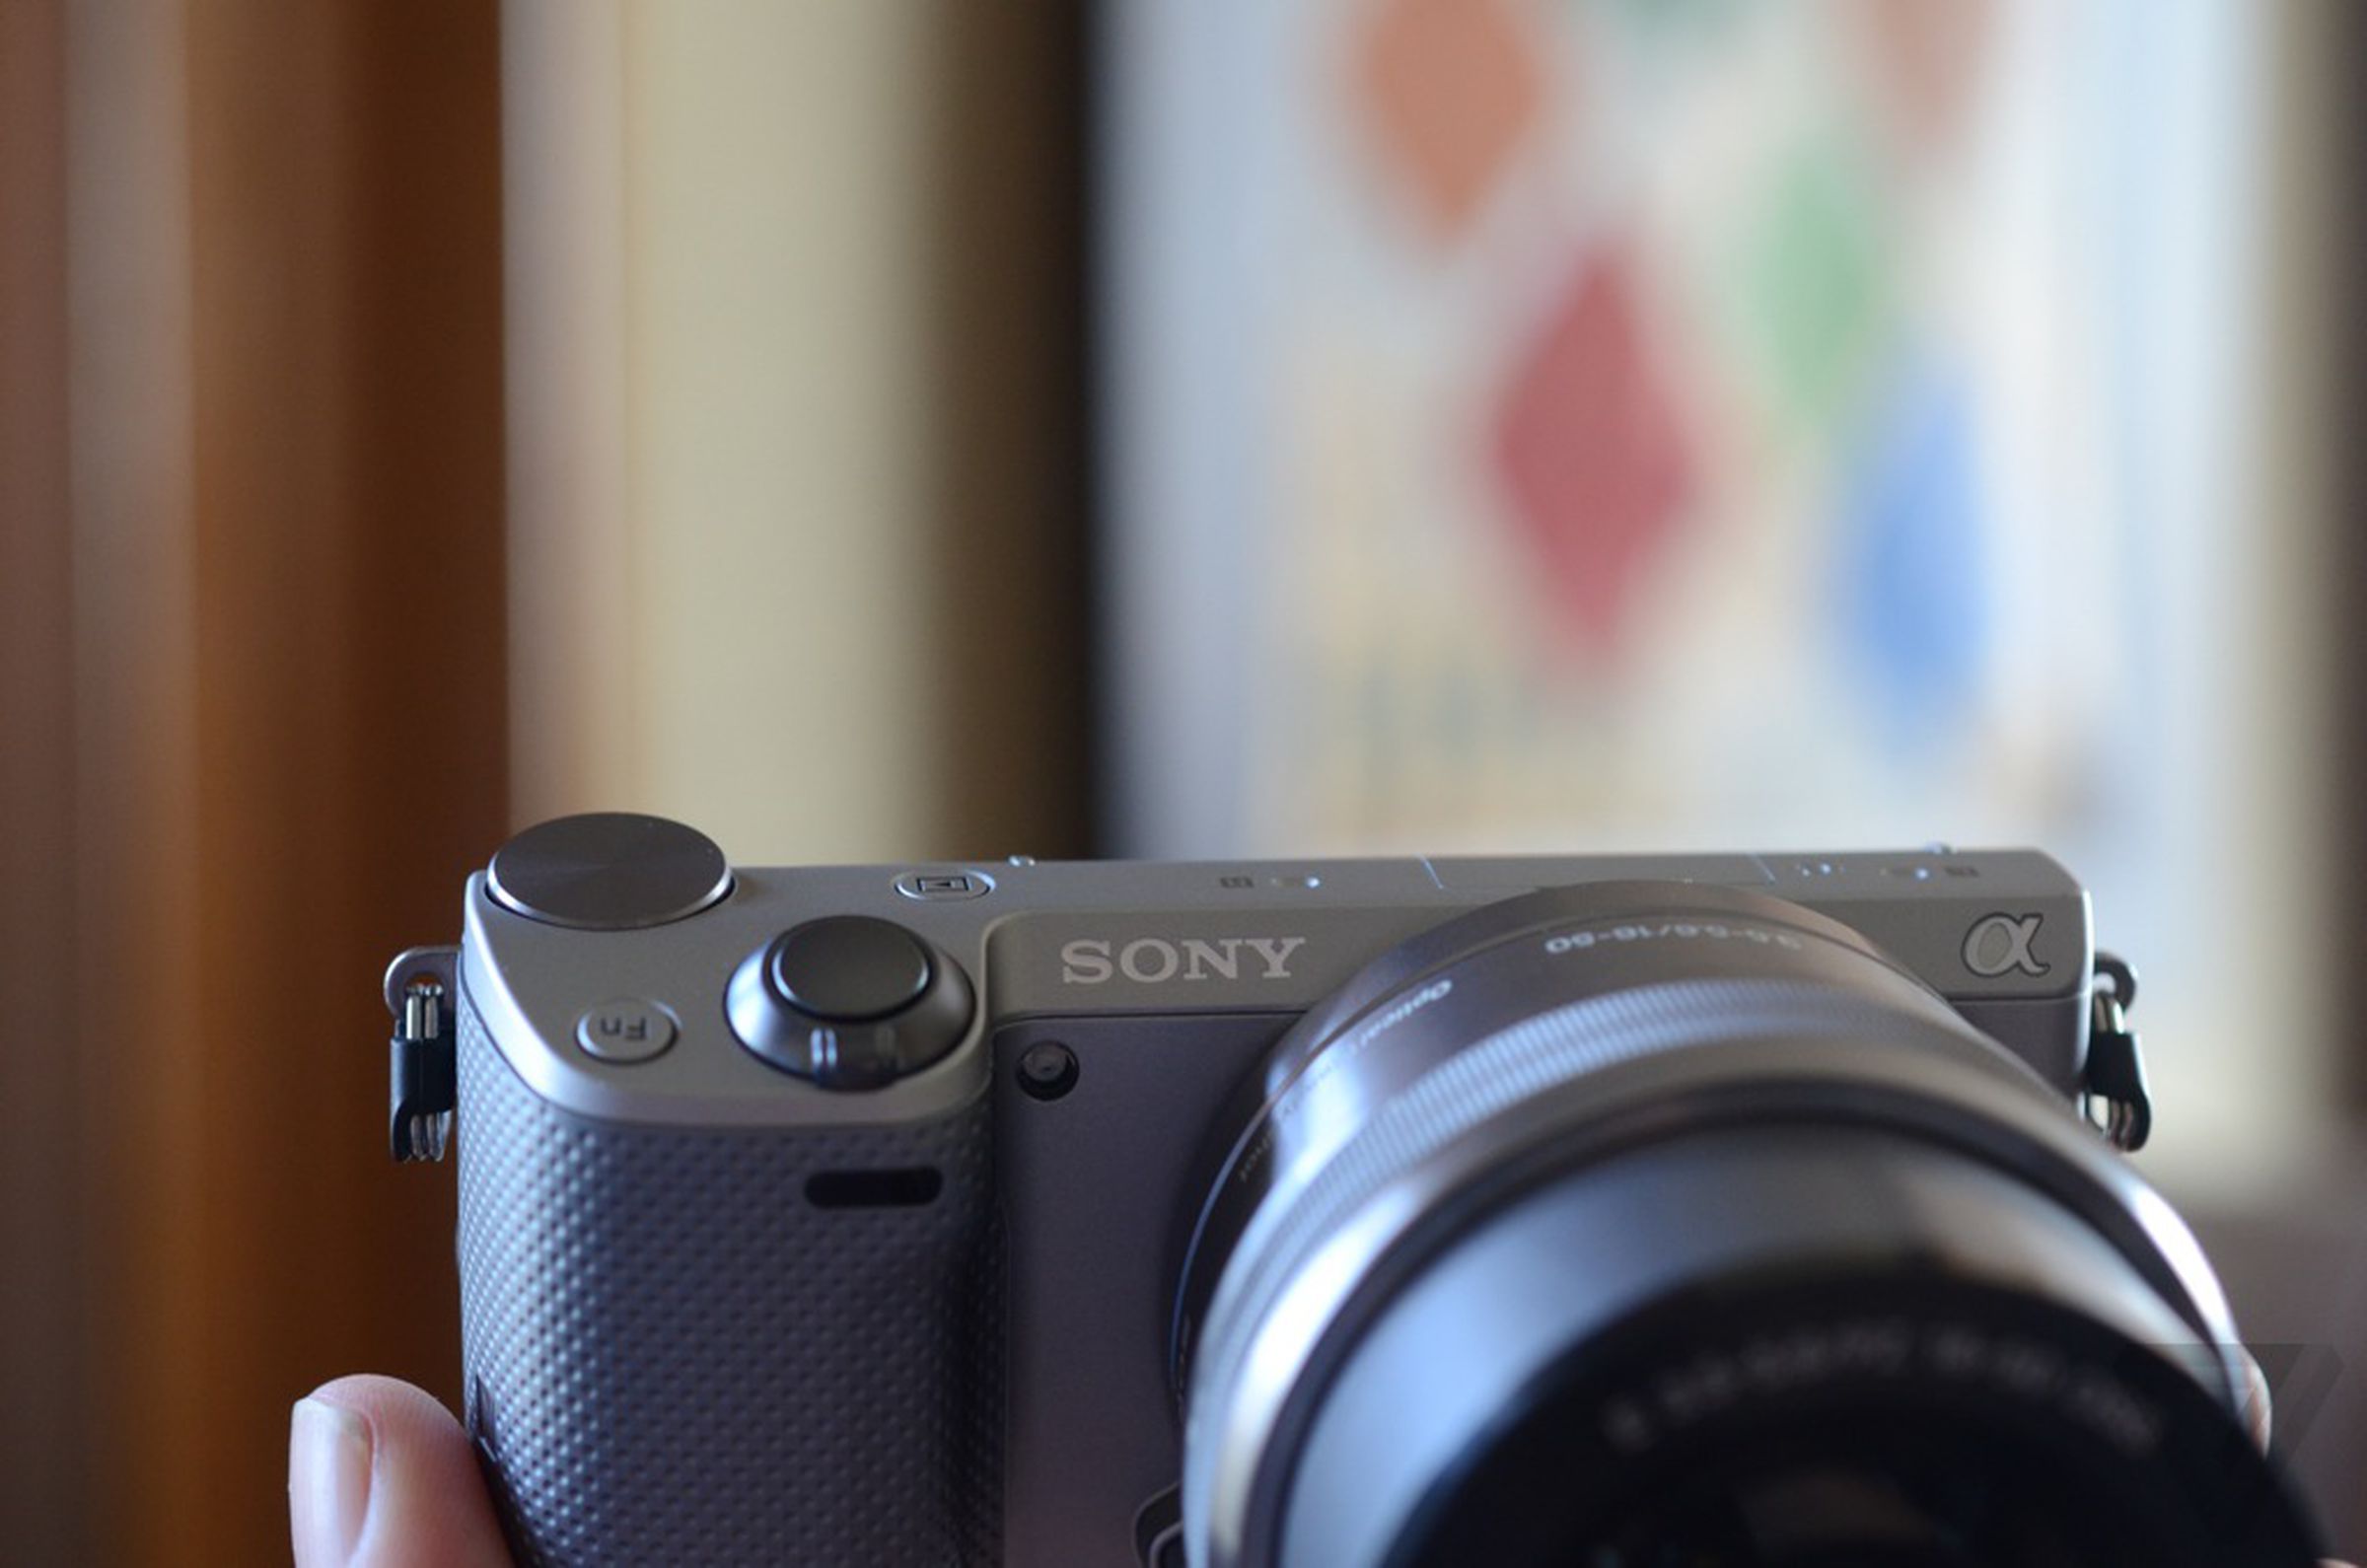 Sony Alpha A3000 and NEX-5T pictures